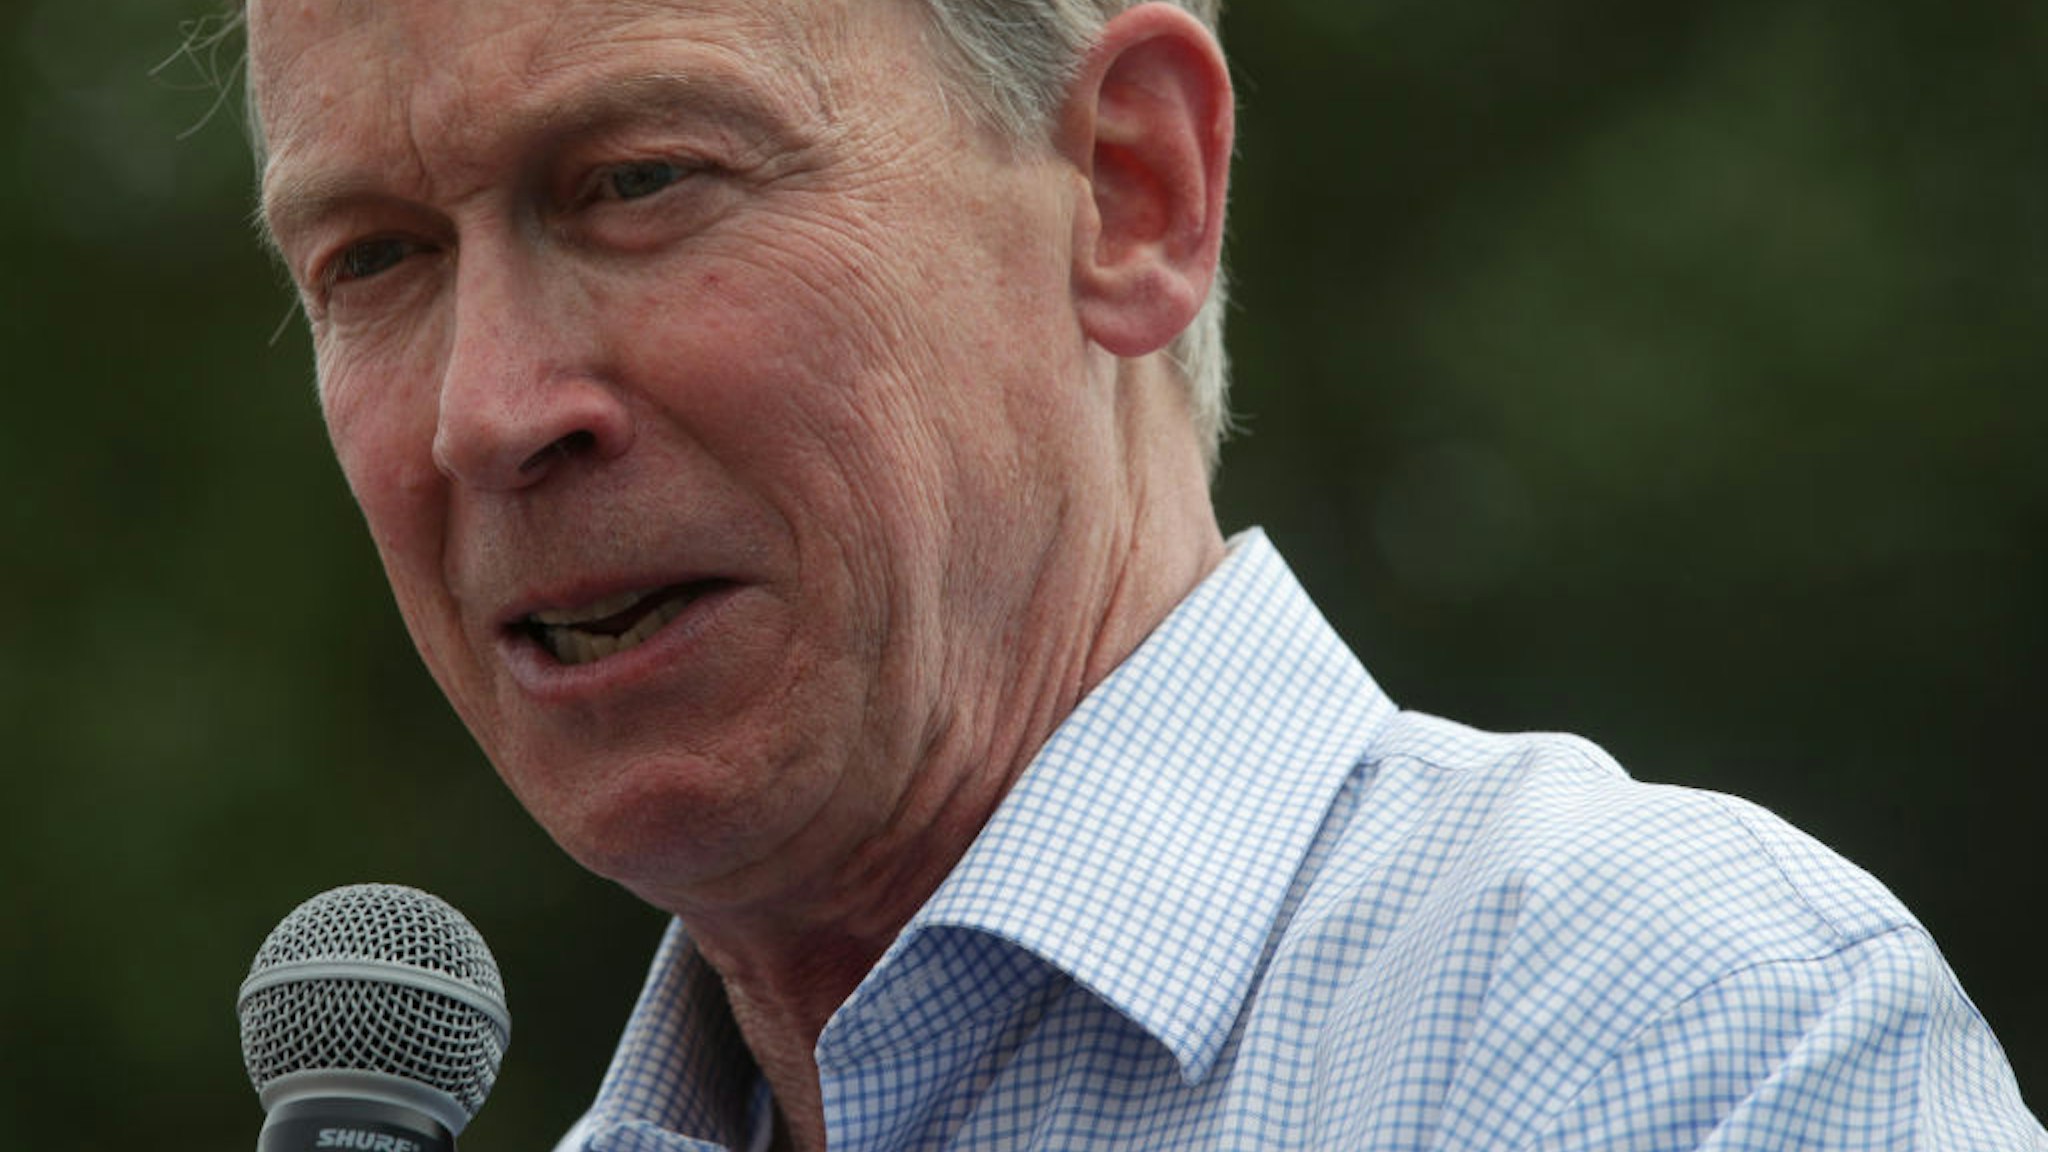 Democratic presidential candidate and former Governor of Colorado John Hickenlooper delivers a campaign speech at the Des Moines Register Political Soapbox at the Iowa State Fair on August 10, 2019 in Des Moines, Iowa.